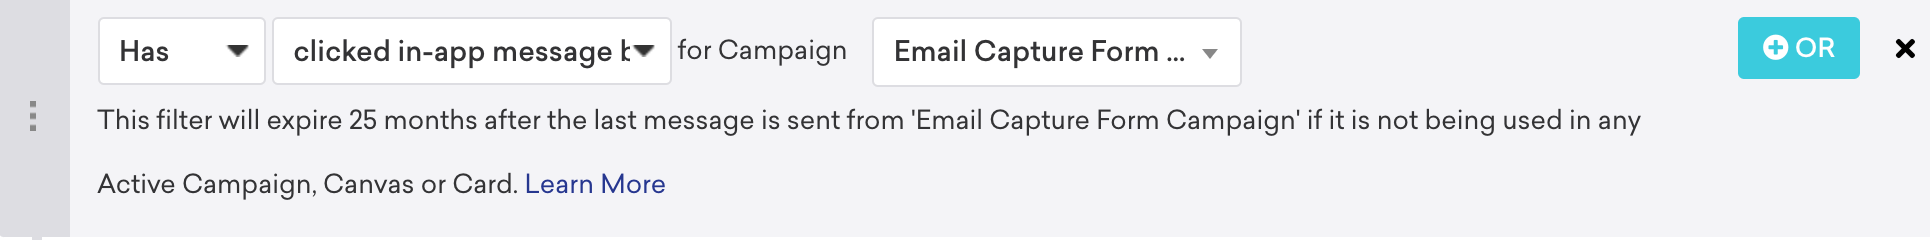 Filter for has clicked in-app message button 1 for your web email capture form campaign